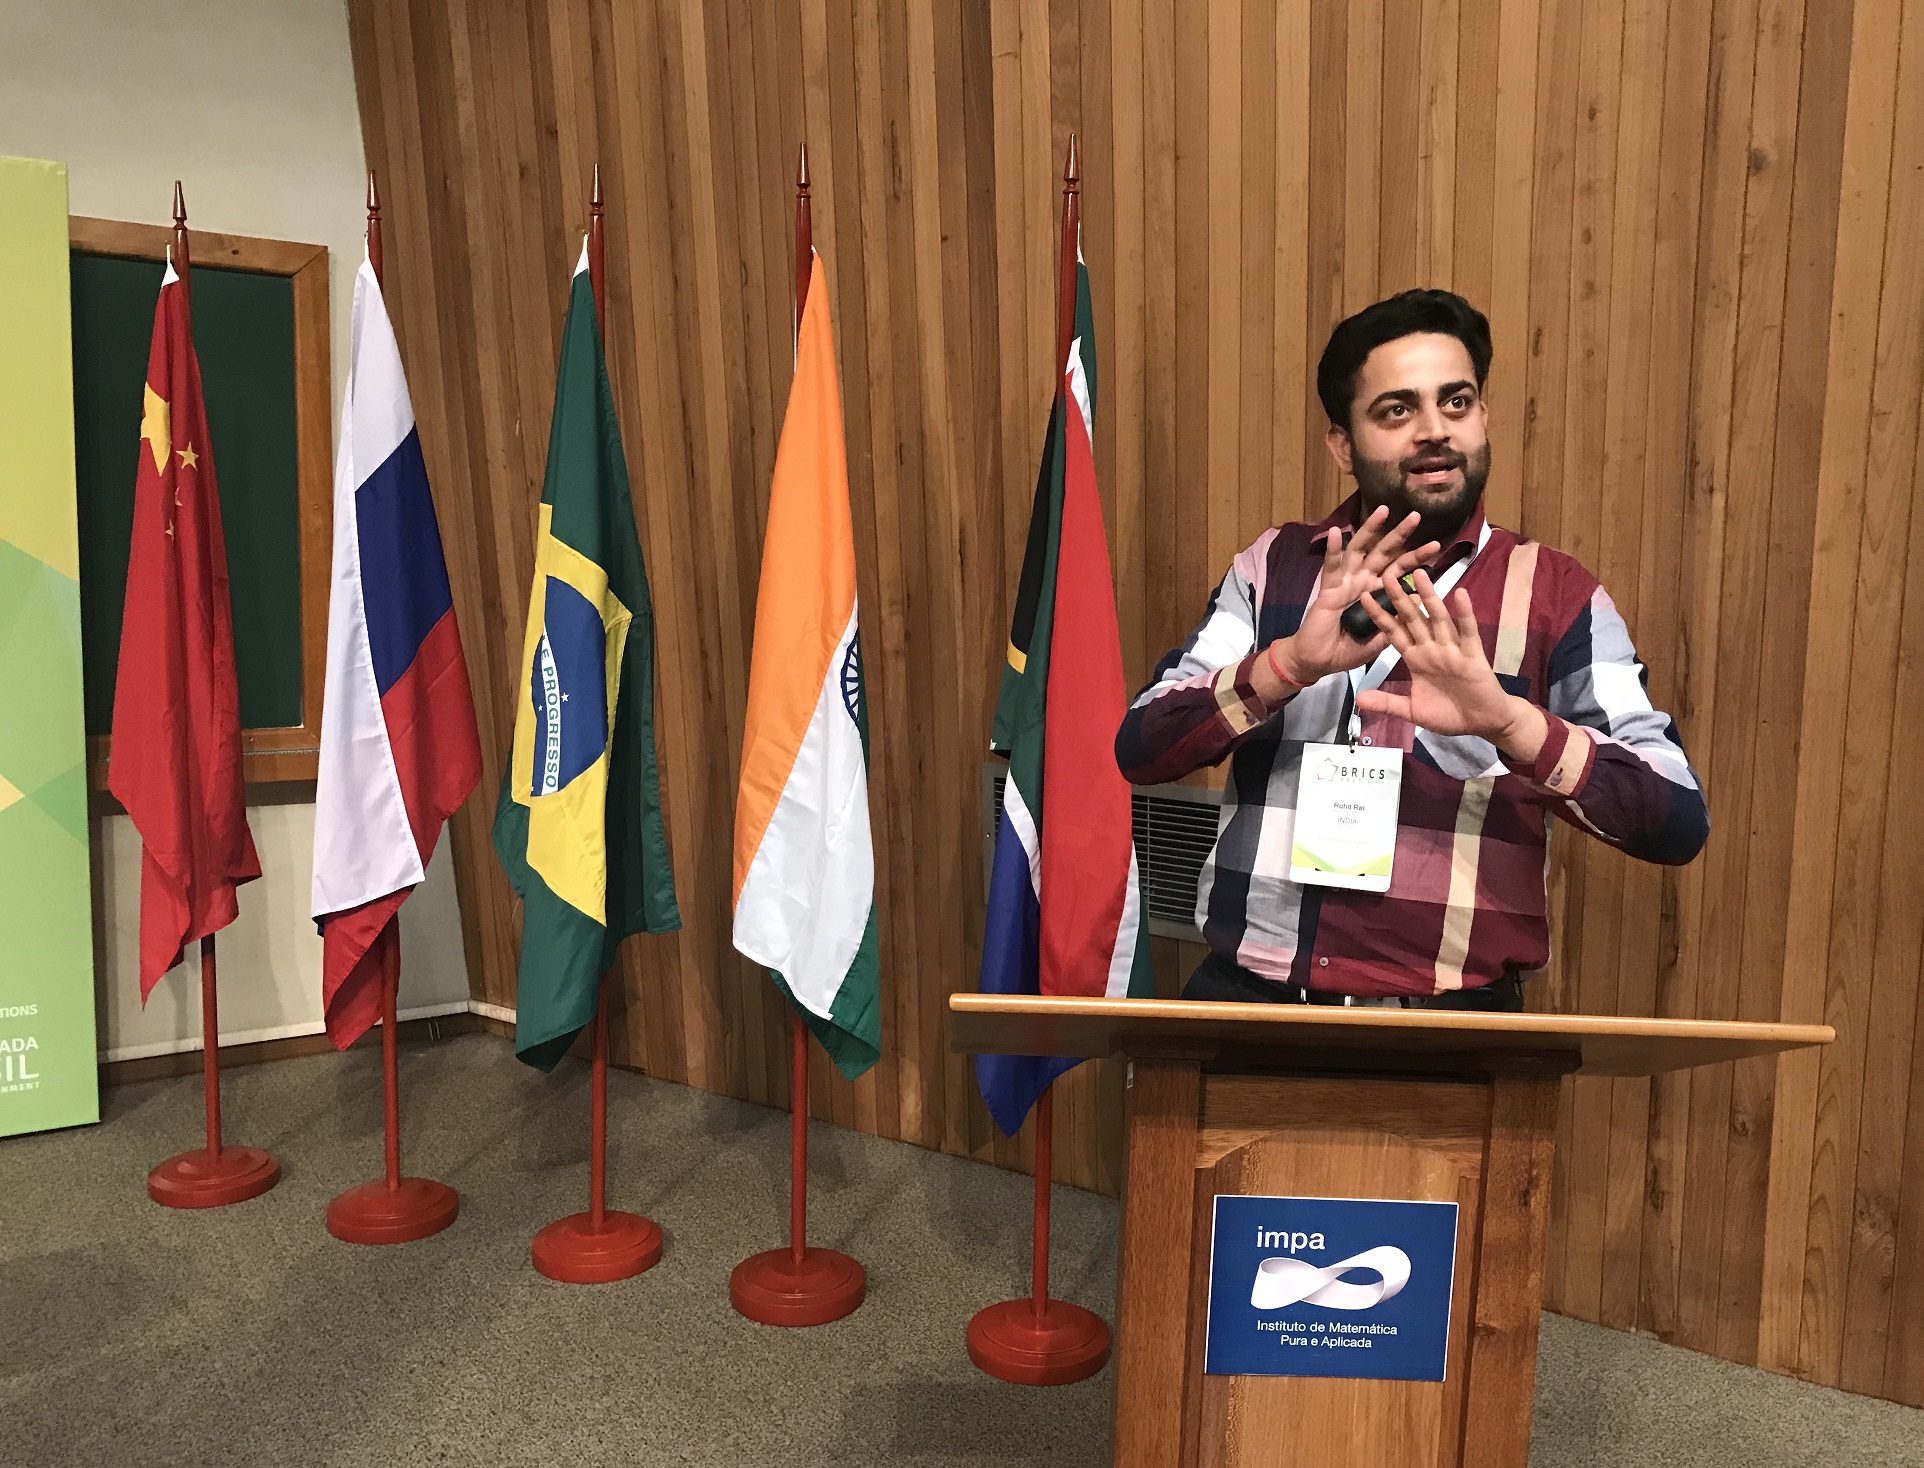 LPU Young Scientist Dr Rohit Rai addressed the conclave in 4th BRICS Young Scientist Conclave at Brazil South America on 2G bio-fuel ethanol from agriculture residue 'PARALI' (3)